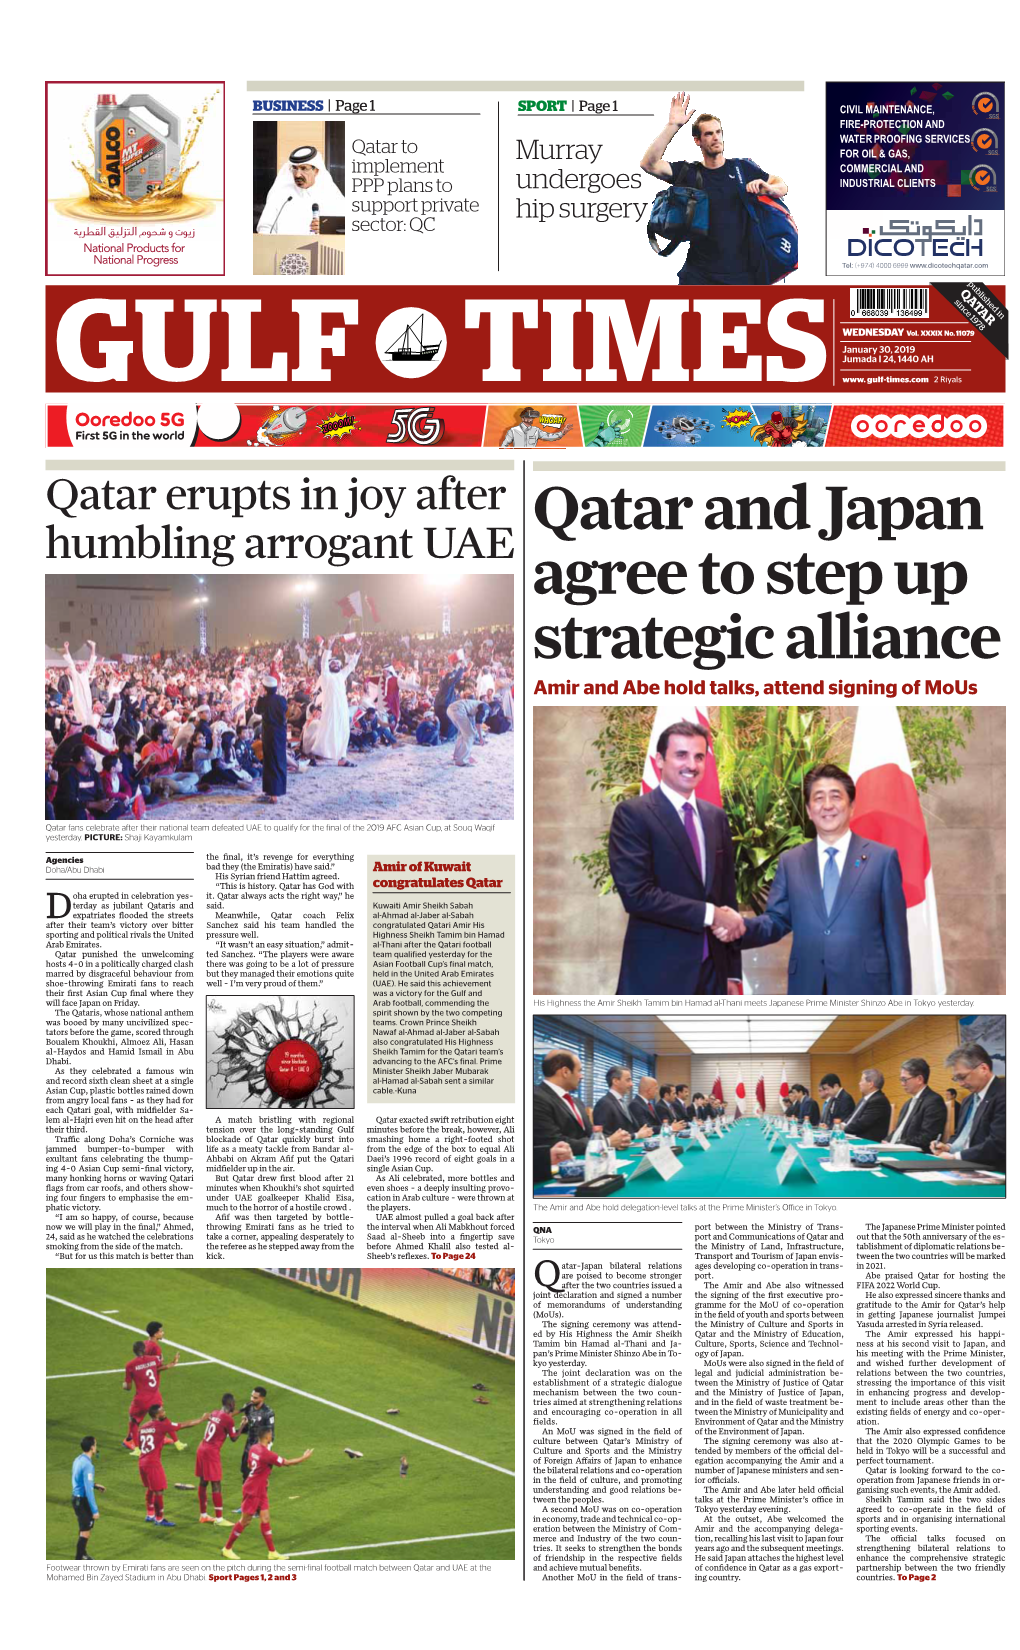 Qatar and Japan Agree to Step up Strategic Alliance